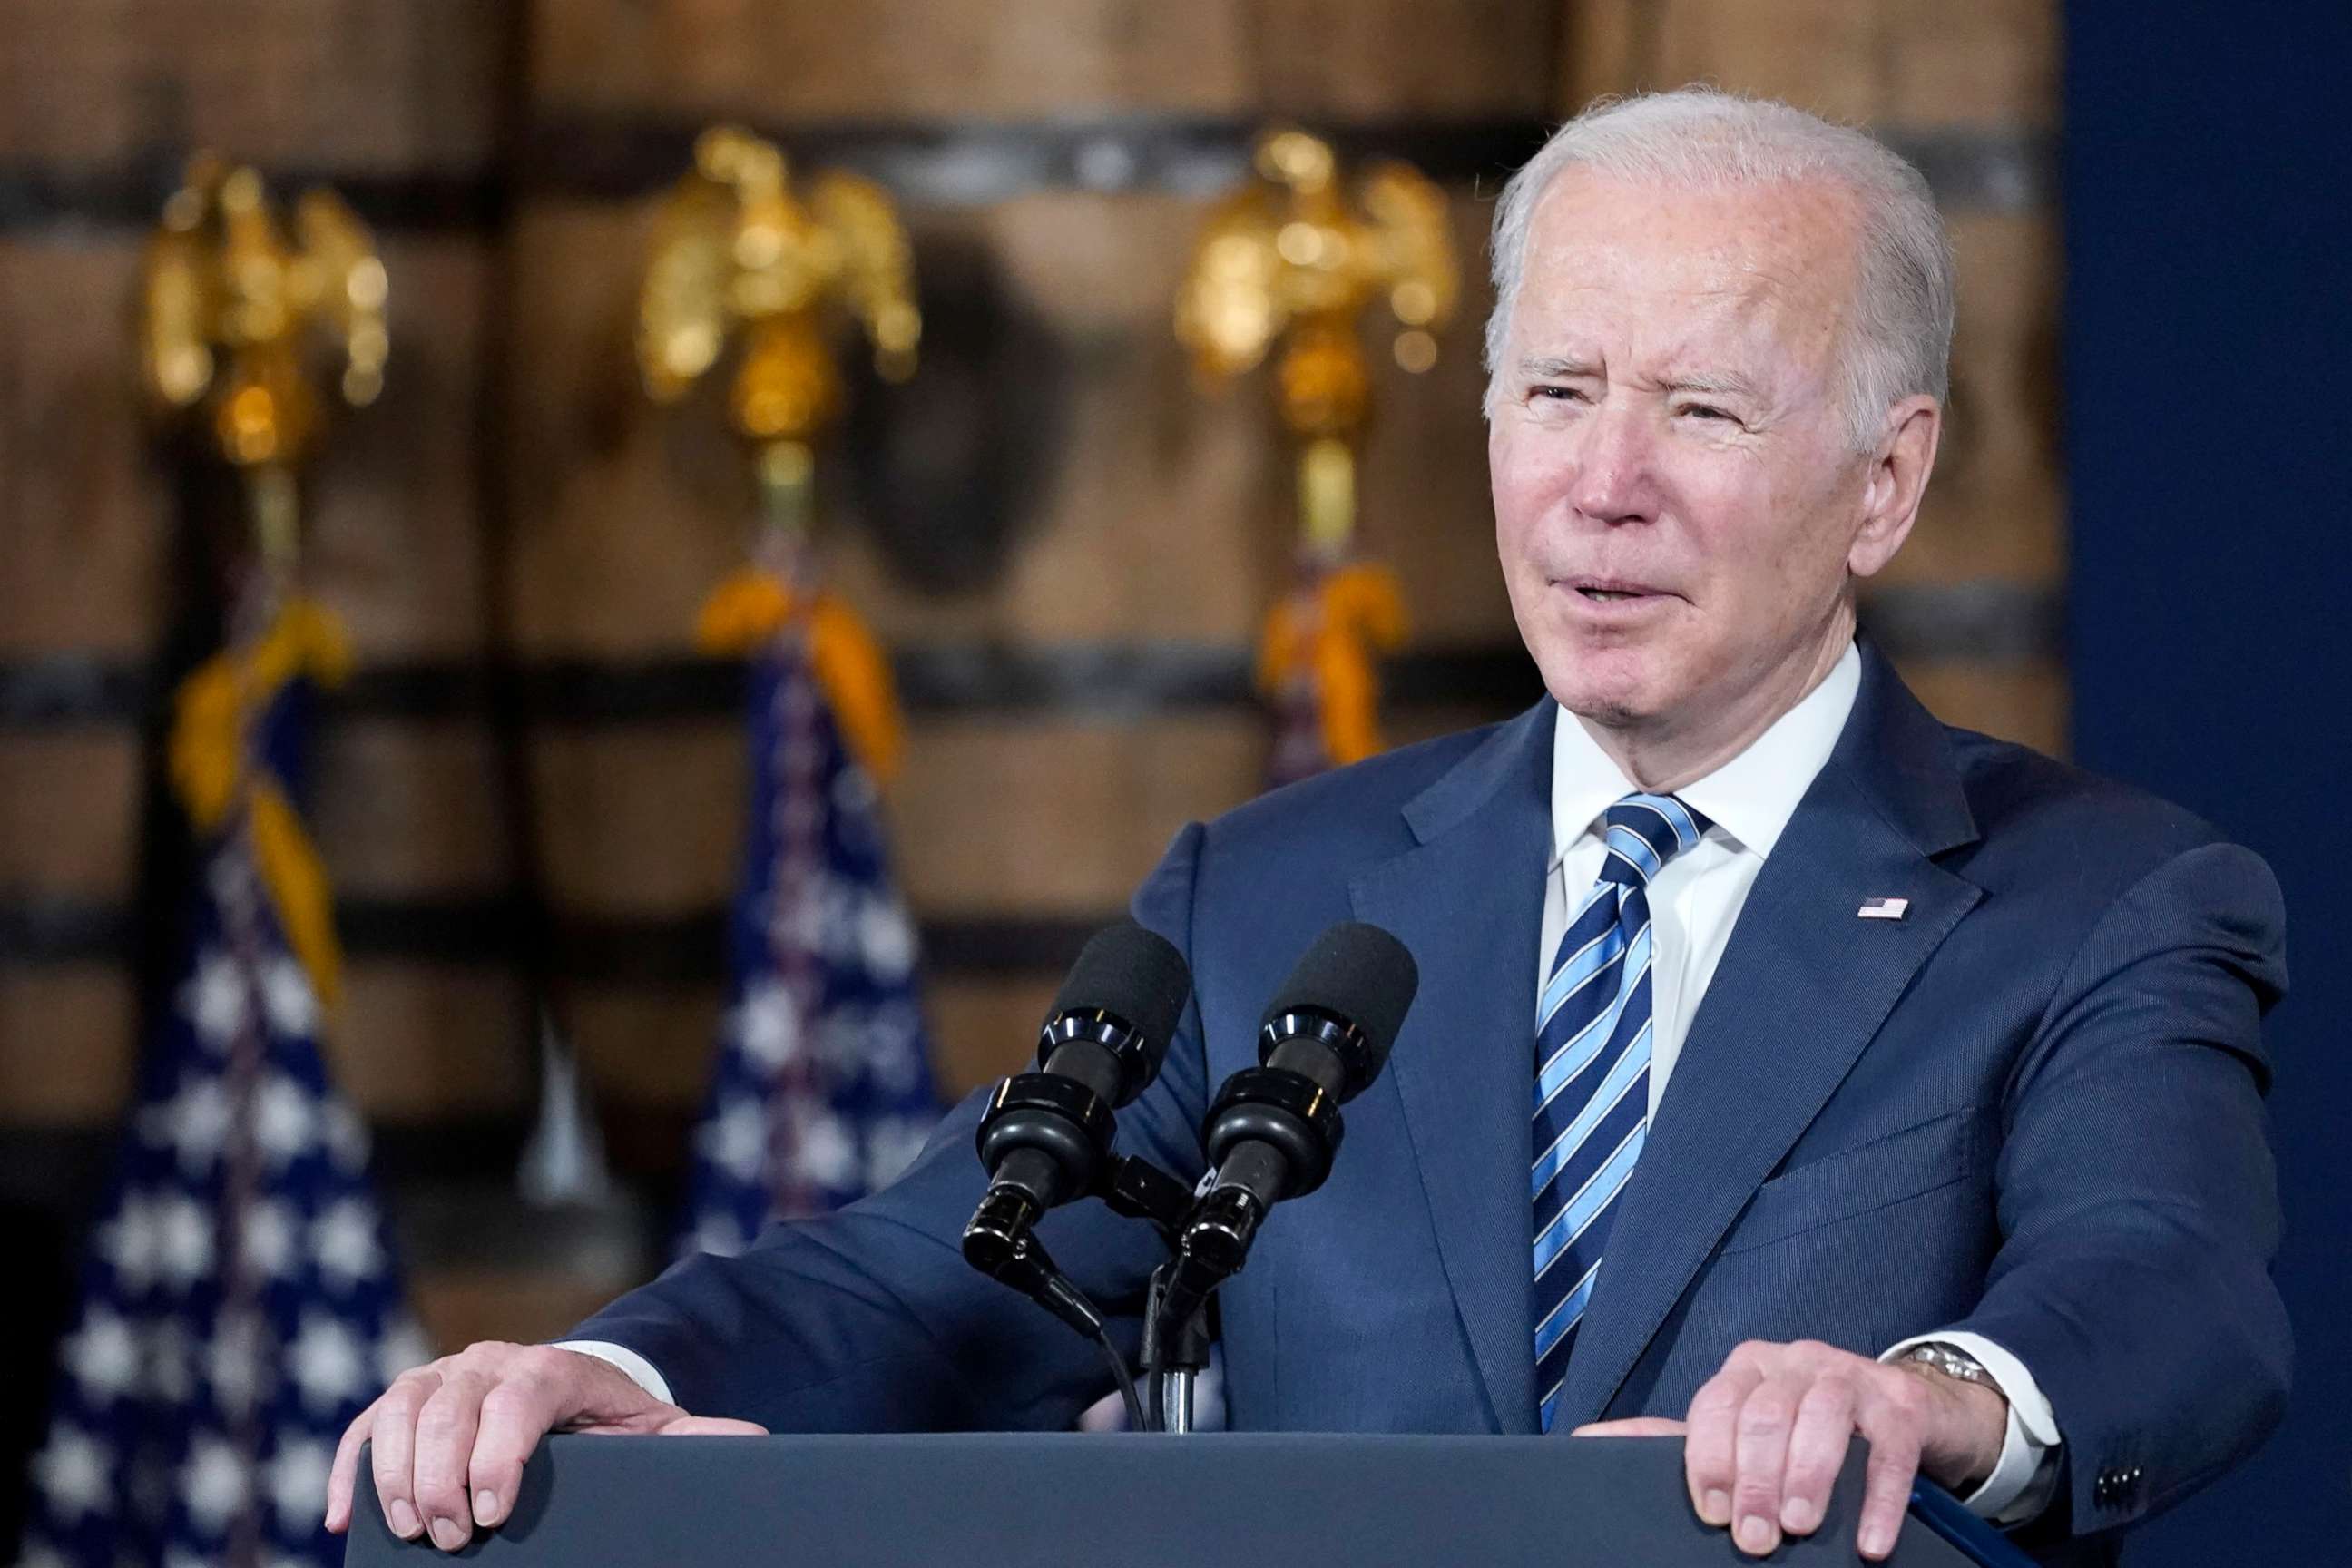 PHOTO: President Joe Biden speaks the about the long-delayed cleanup of Great Lakes harbors and tributaries polluted with industrial toxins at the Shipyards in Lorain, Ohio, Feb. 17, 2022.